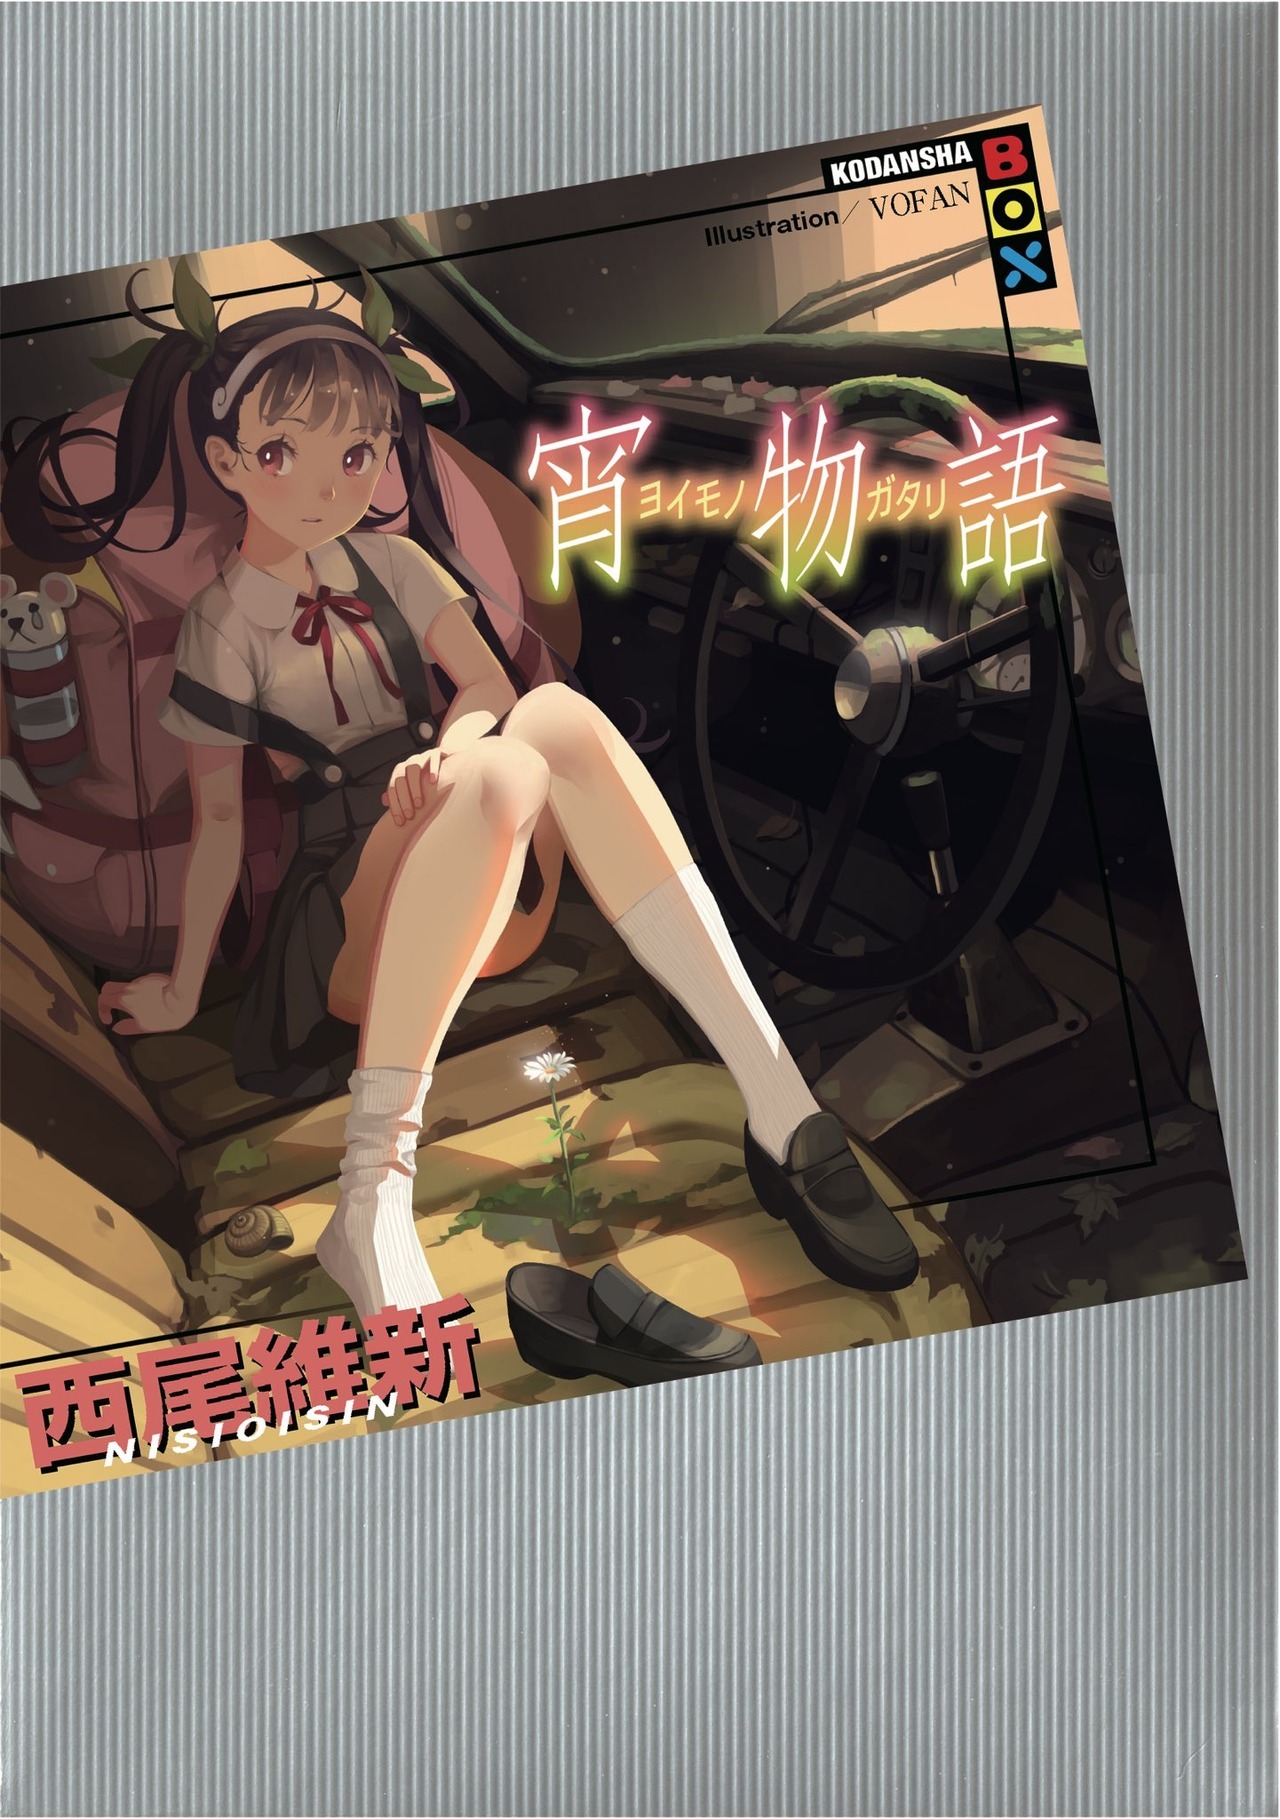 The second novel in the Monster Season of the Monogatari series, titled âYoimonogatari,â will be released June 15th.